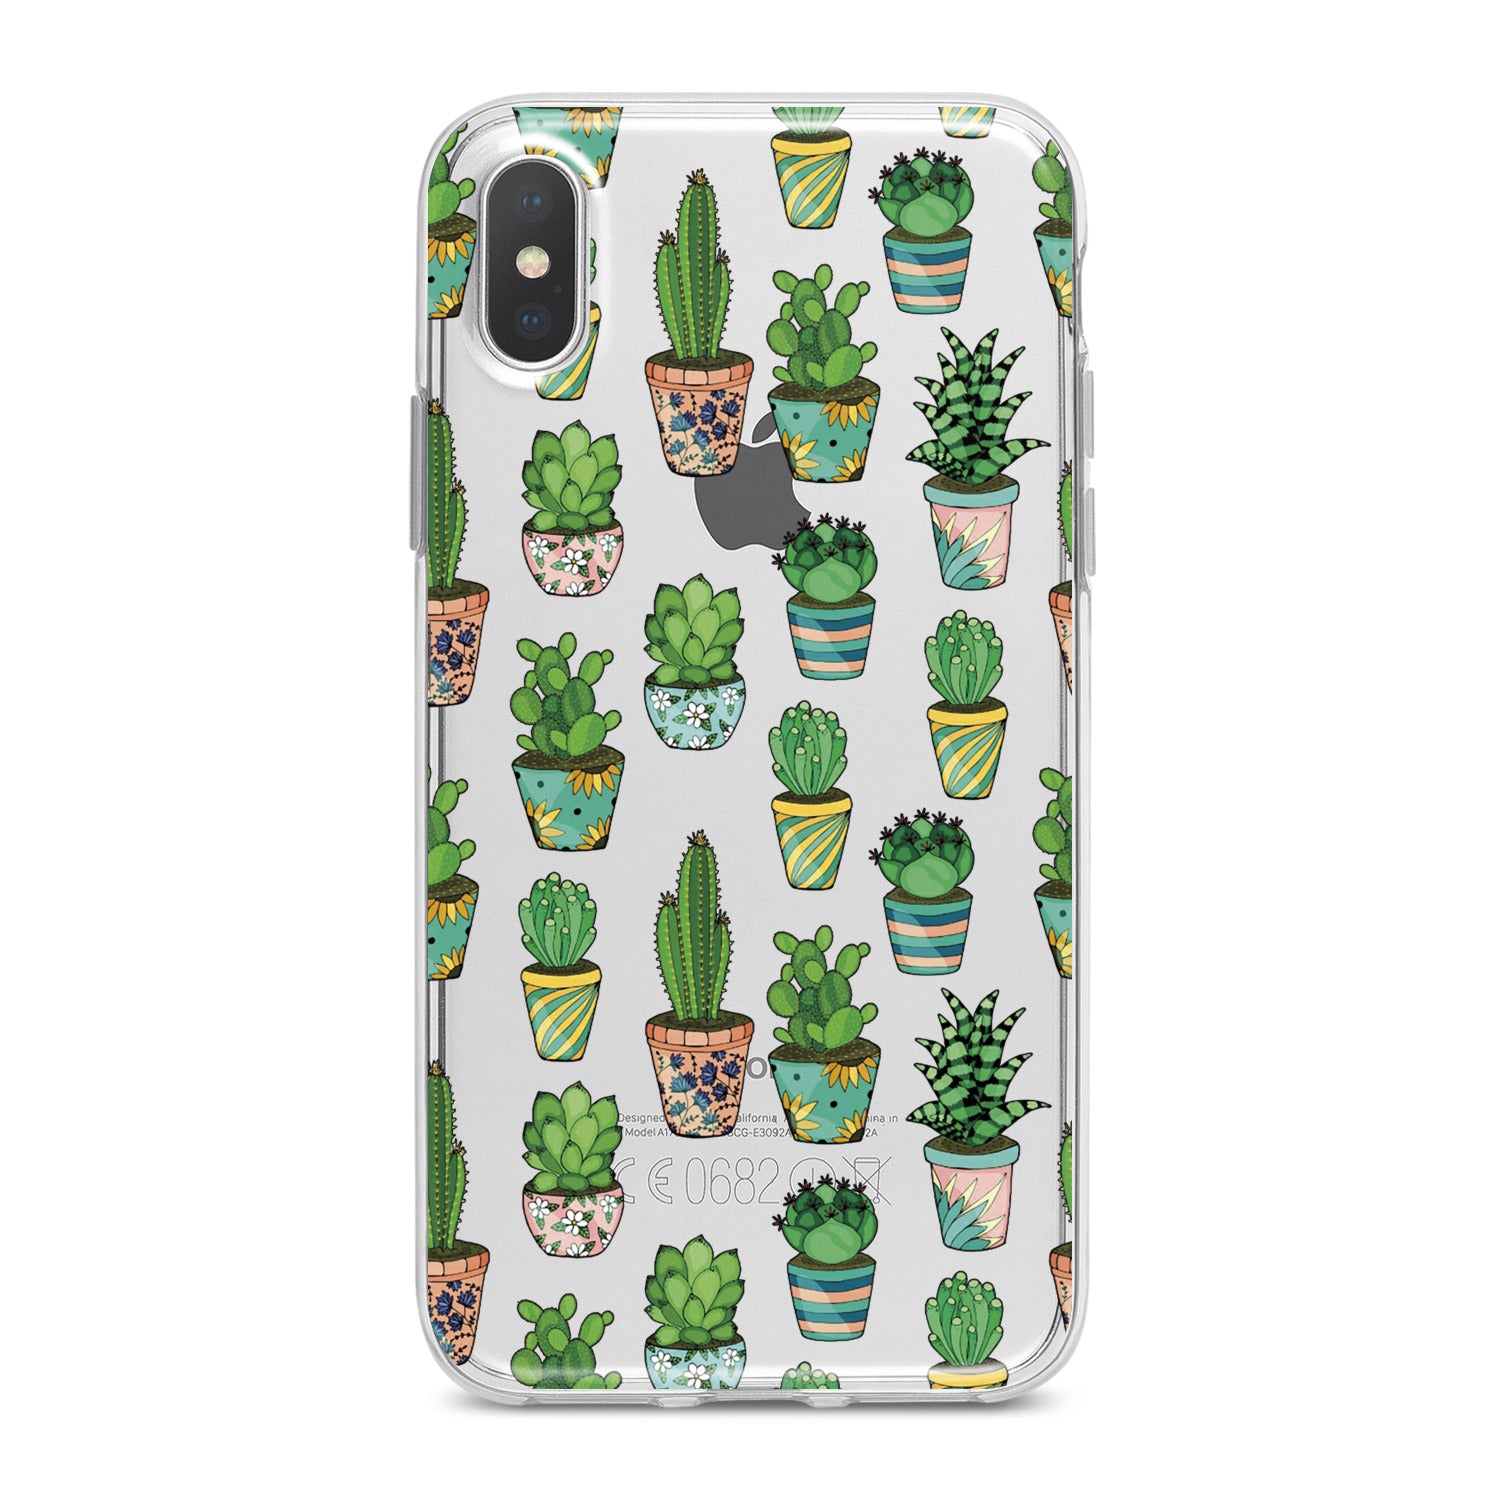 Lex Altern Decorative Cactuses Phone Case for your iPhone & Android phone.